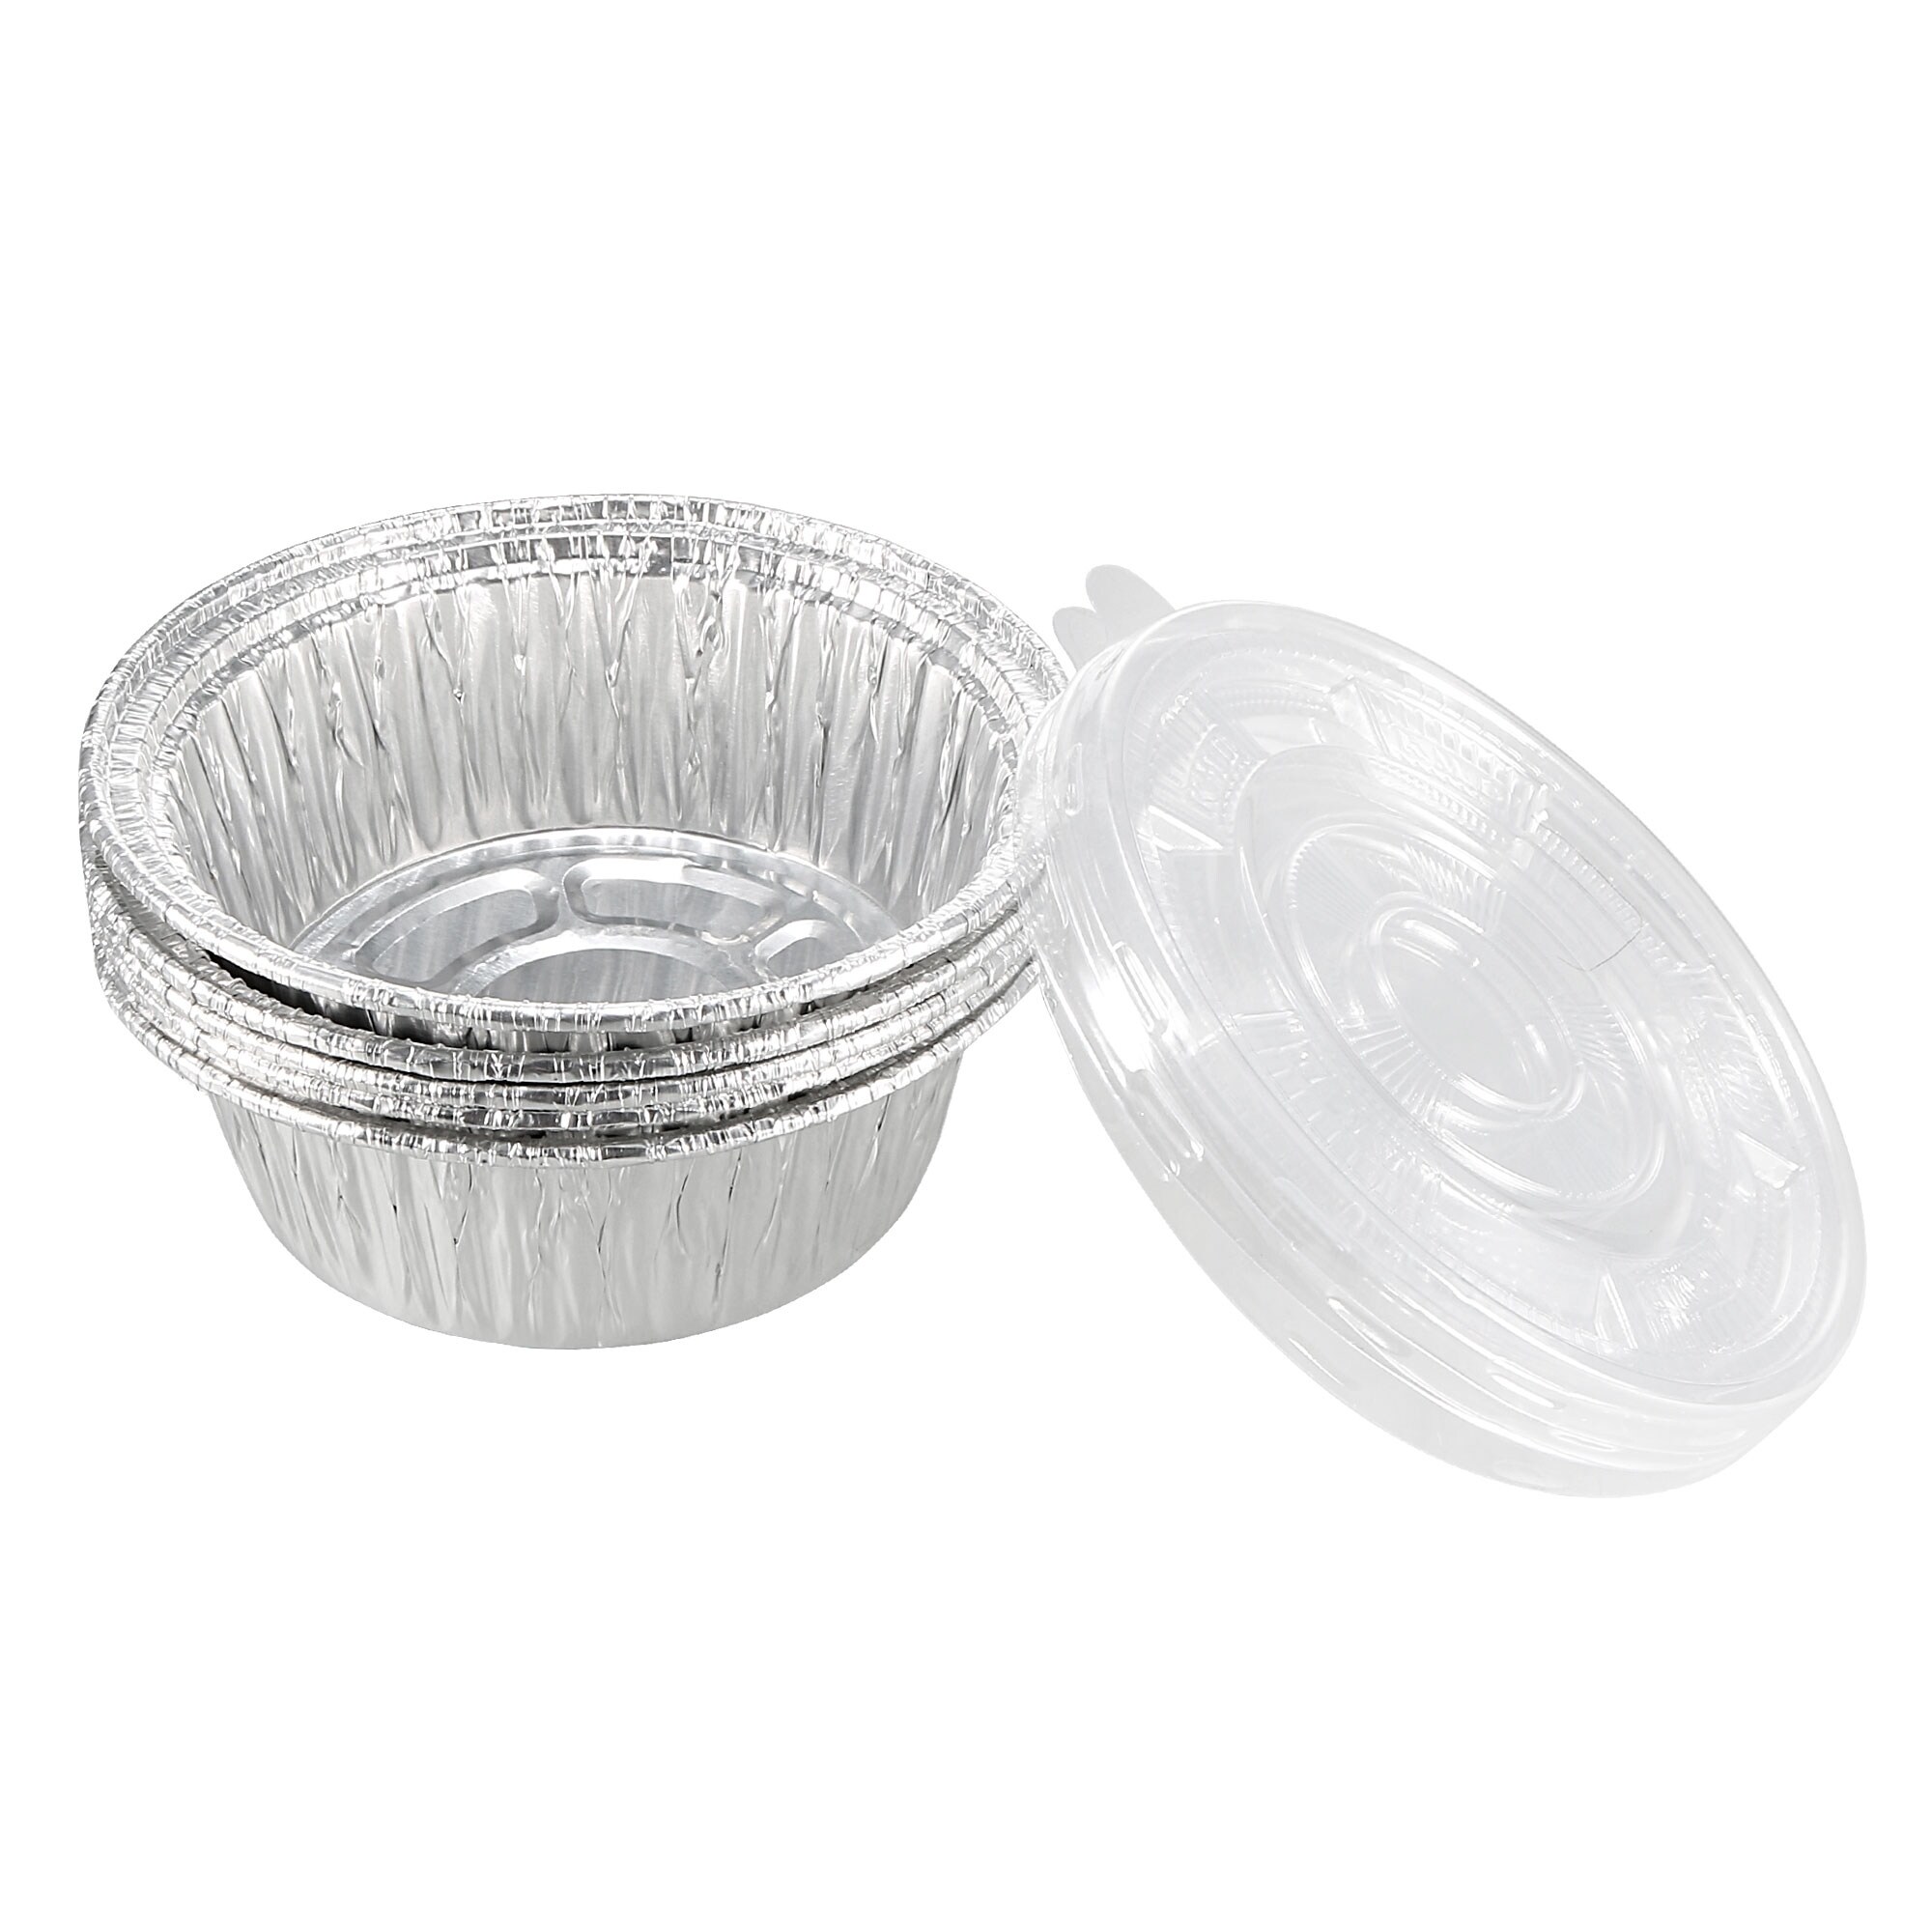 https://ak1.ostkcdn.com/images/products/is/images/direct/f68db4354cf072eb2160c364bf0c3950afd74936/4.8%22-Round-Aluminum-Foil-Pan-with-Clear-Lid%2C-8.8oz-Disposable-Containers-4pcs.jpg